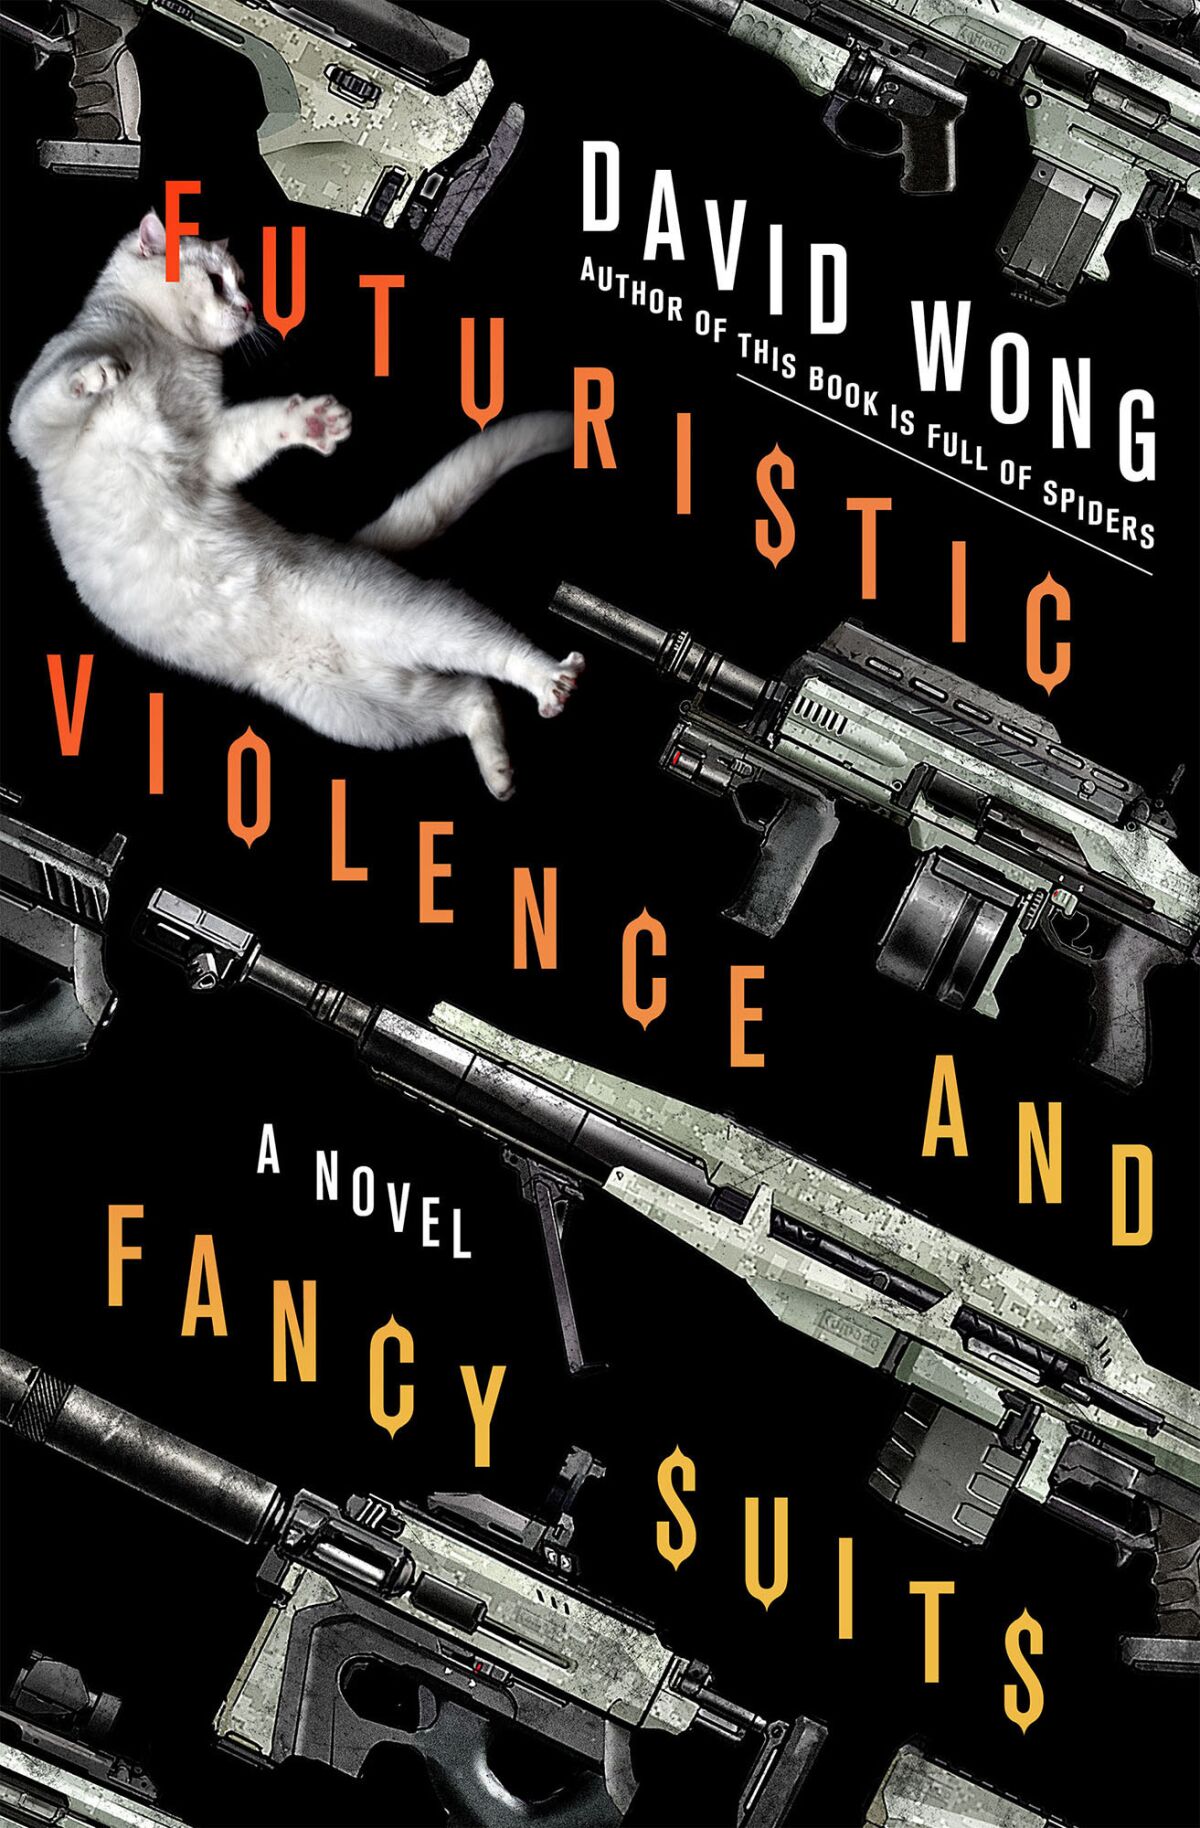 "Futuristic Violence and Fancy Suits" by David Wong